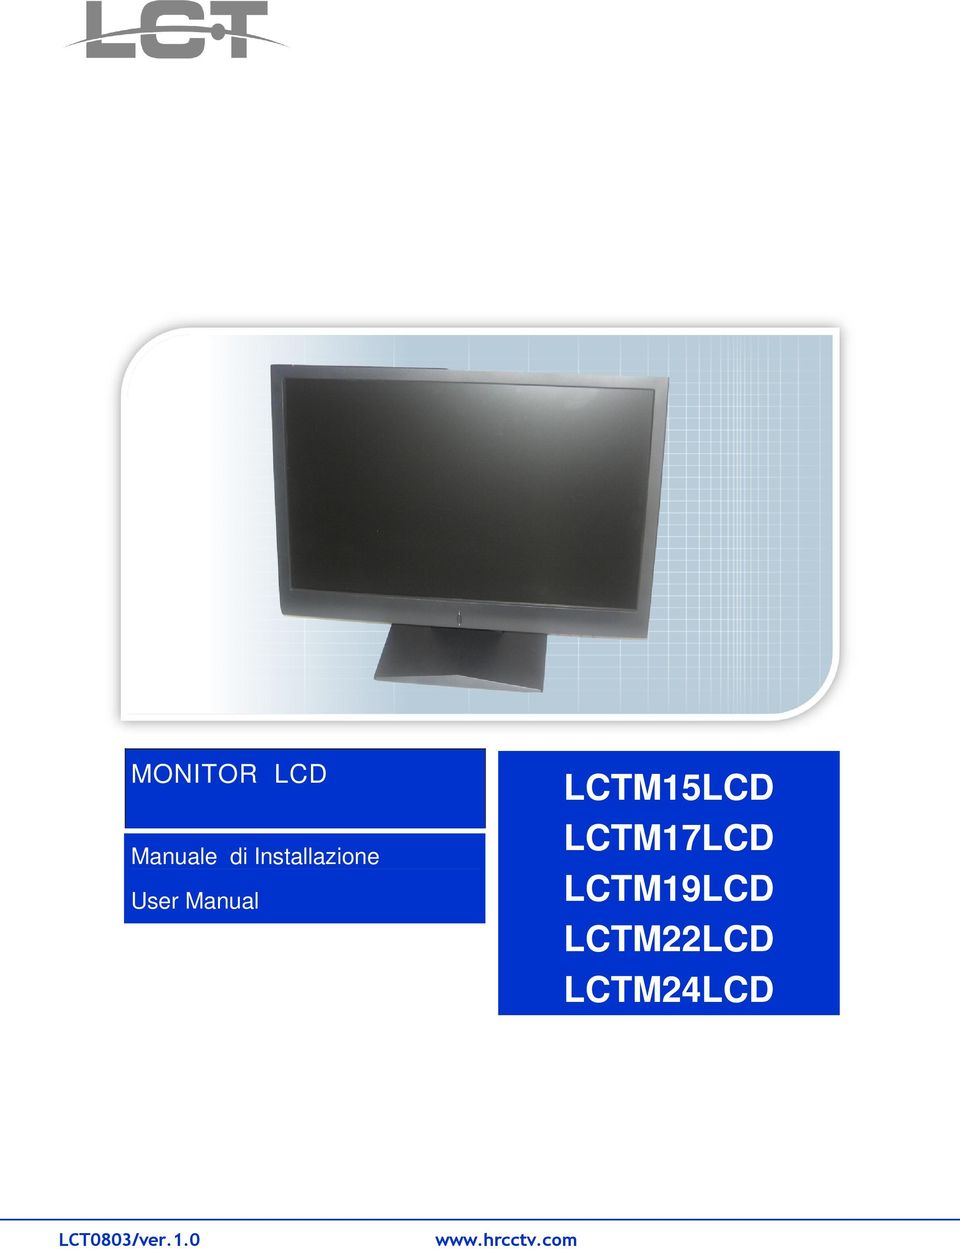 LCTM17LCD LCTM19LCD